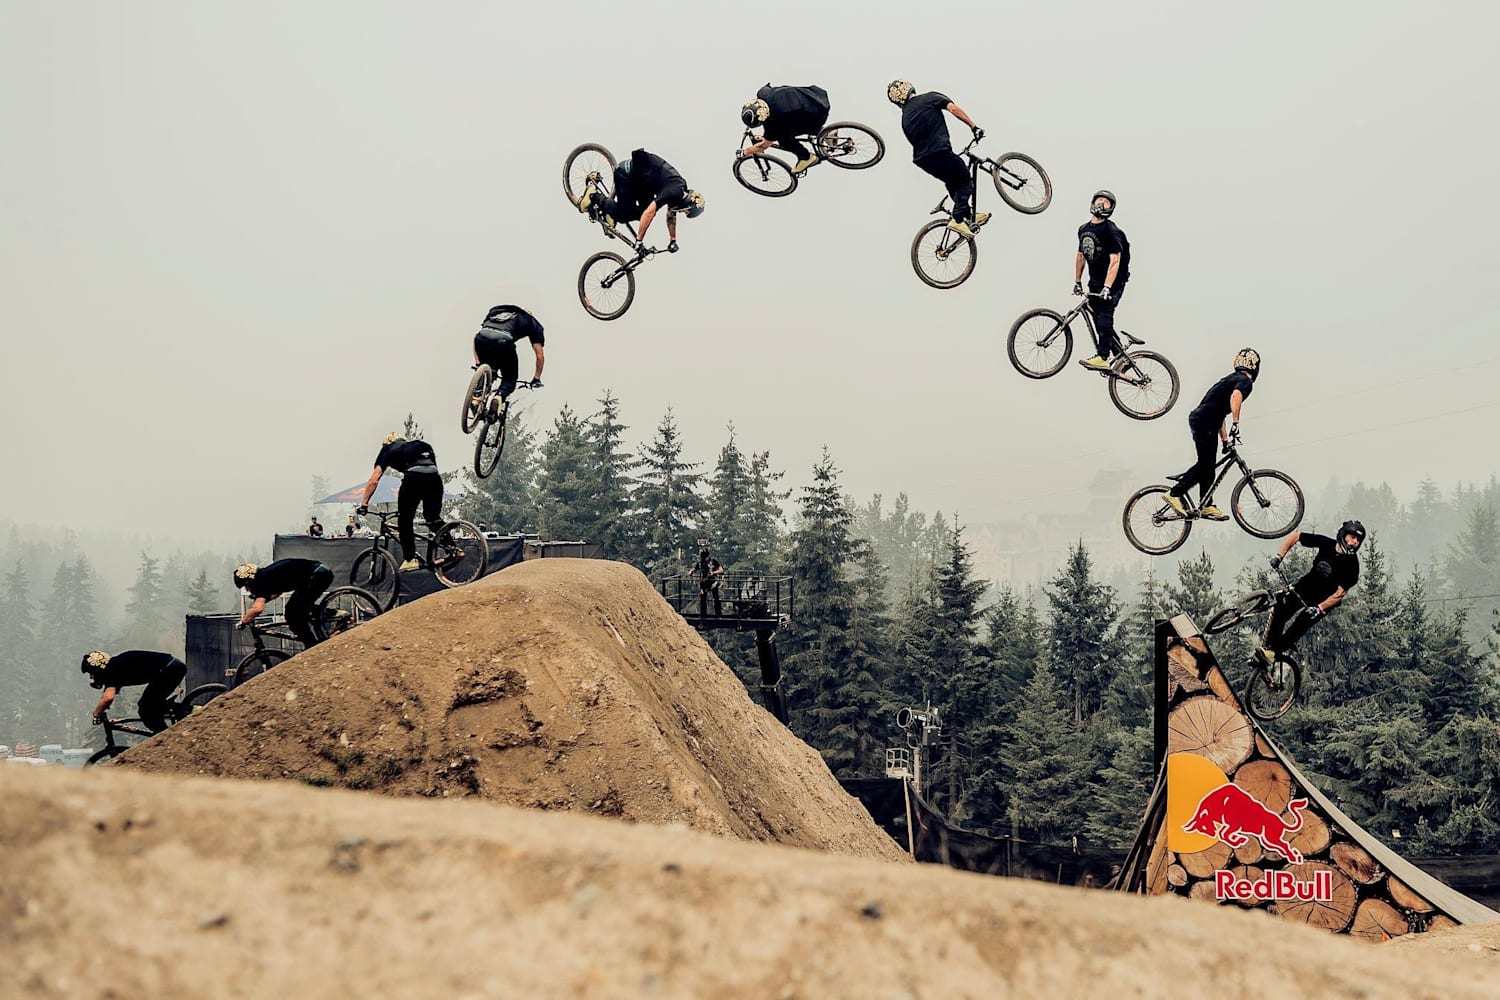 Red Bull Joyride 2018 Results & event highlights